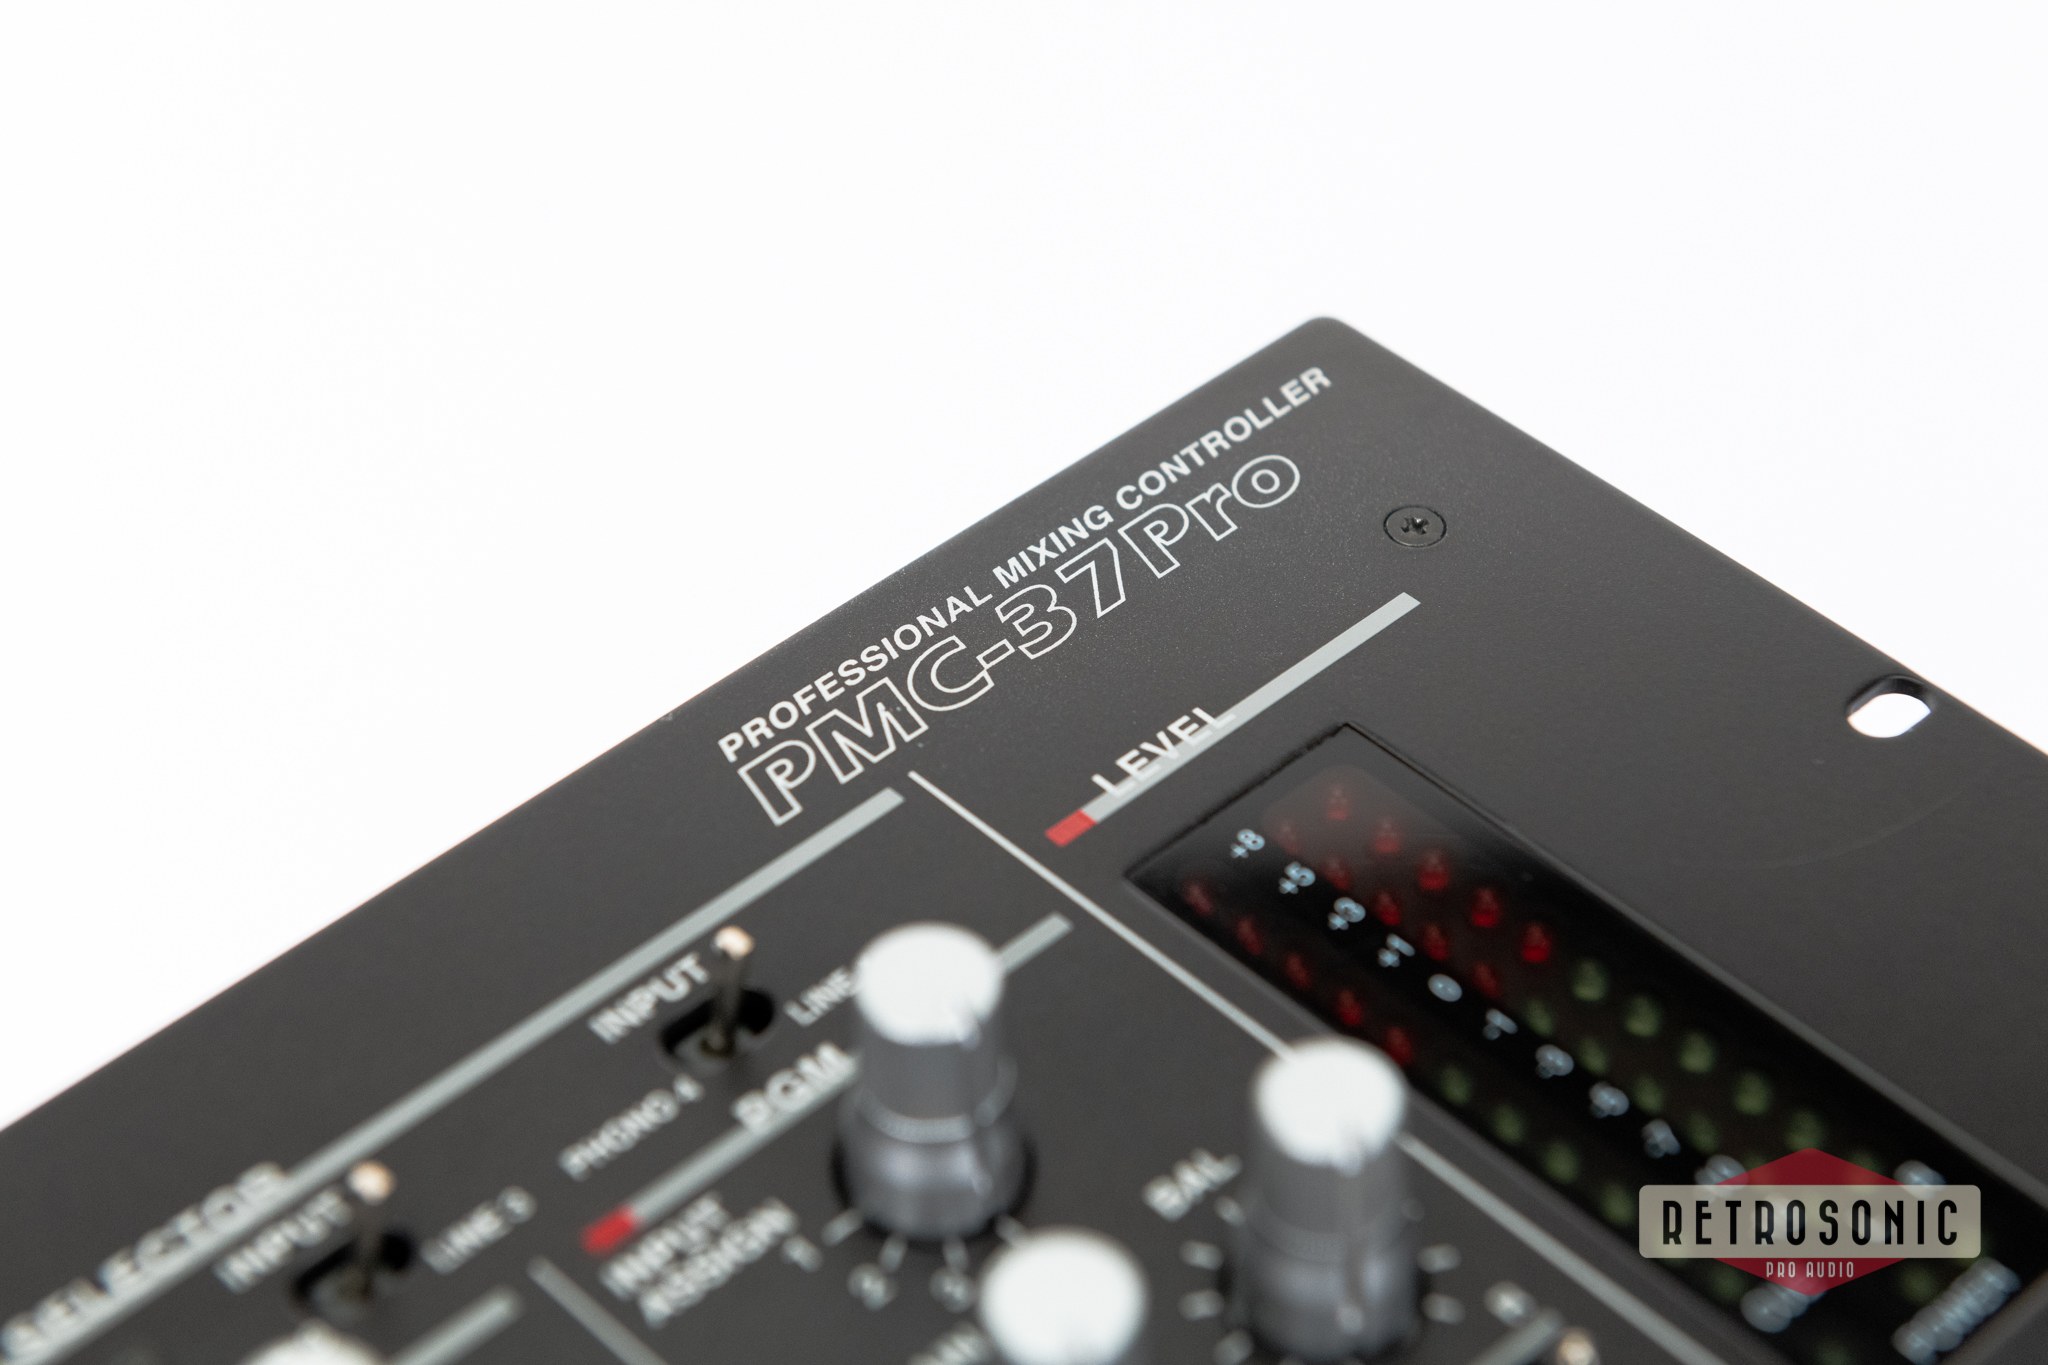 Vestax PMC-37 Pro Professional Mixing Controller